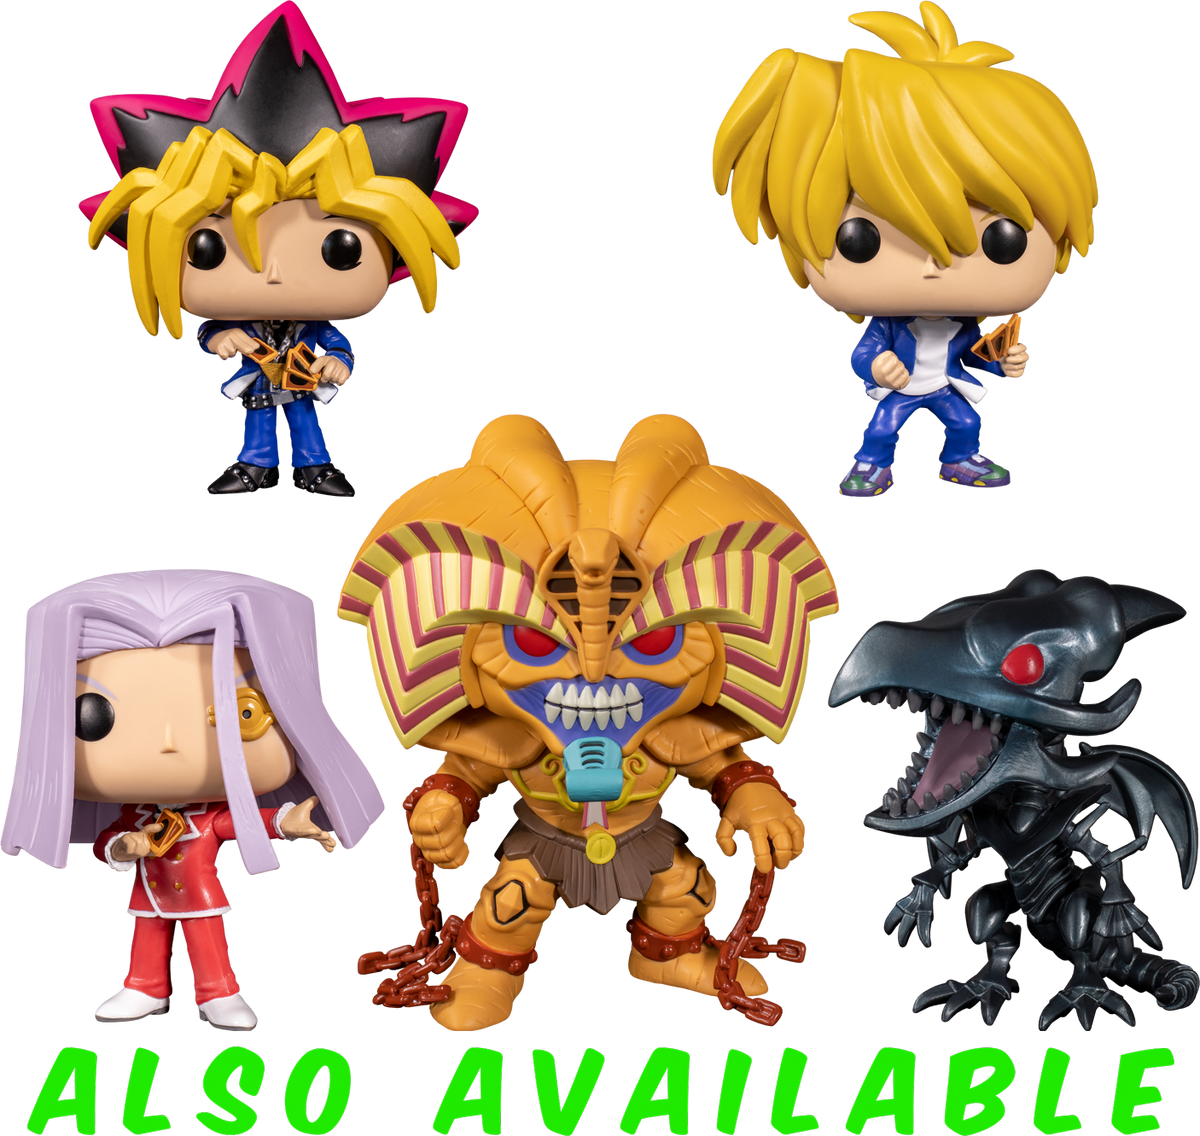 Funko Pop! Yu-Gi-Oh! - Exodia 6" Super Sized #755 - The Amazing Collectables